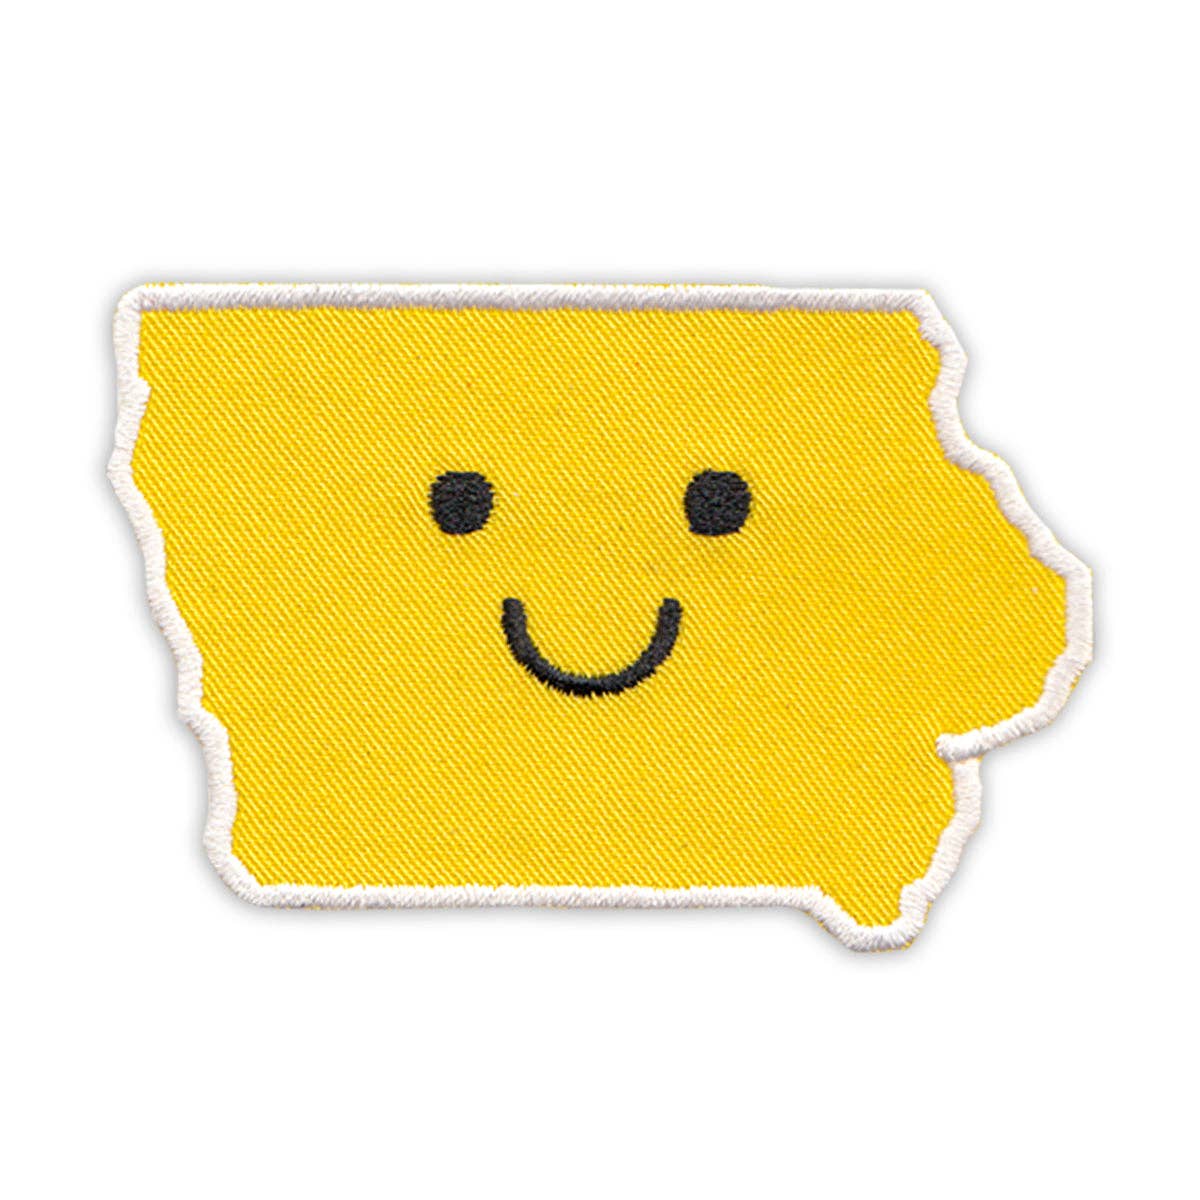 Smiley Face Iowa Patch